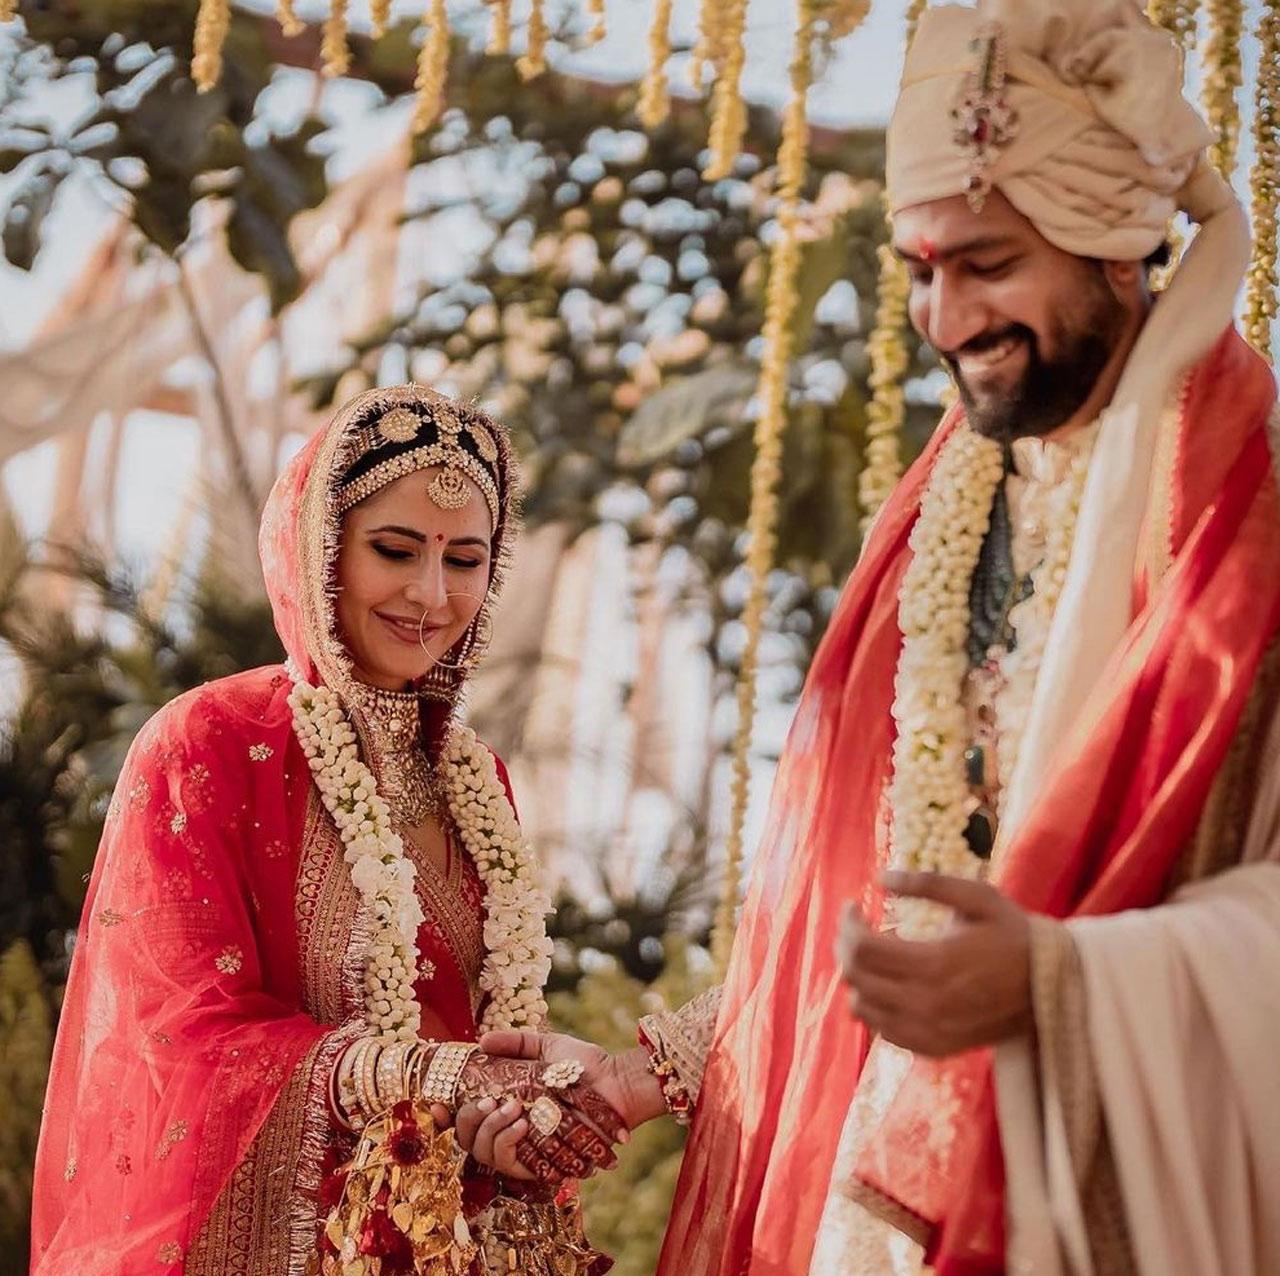 Talking about the groom Vicky Kaushal, the designer spoke about his ivory silk sherwani and wrote- 